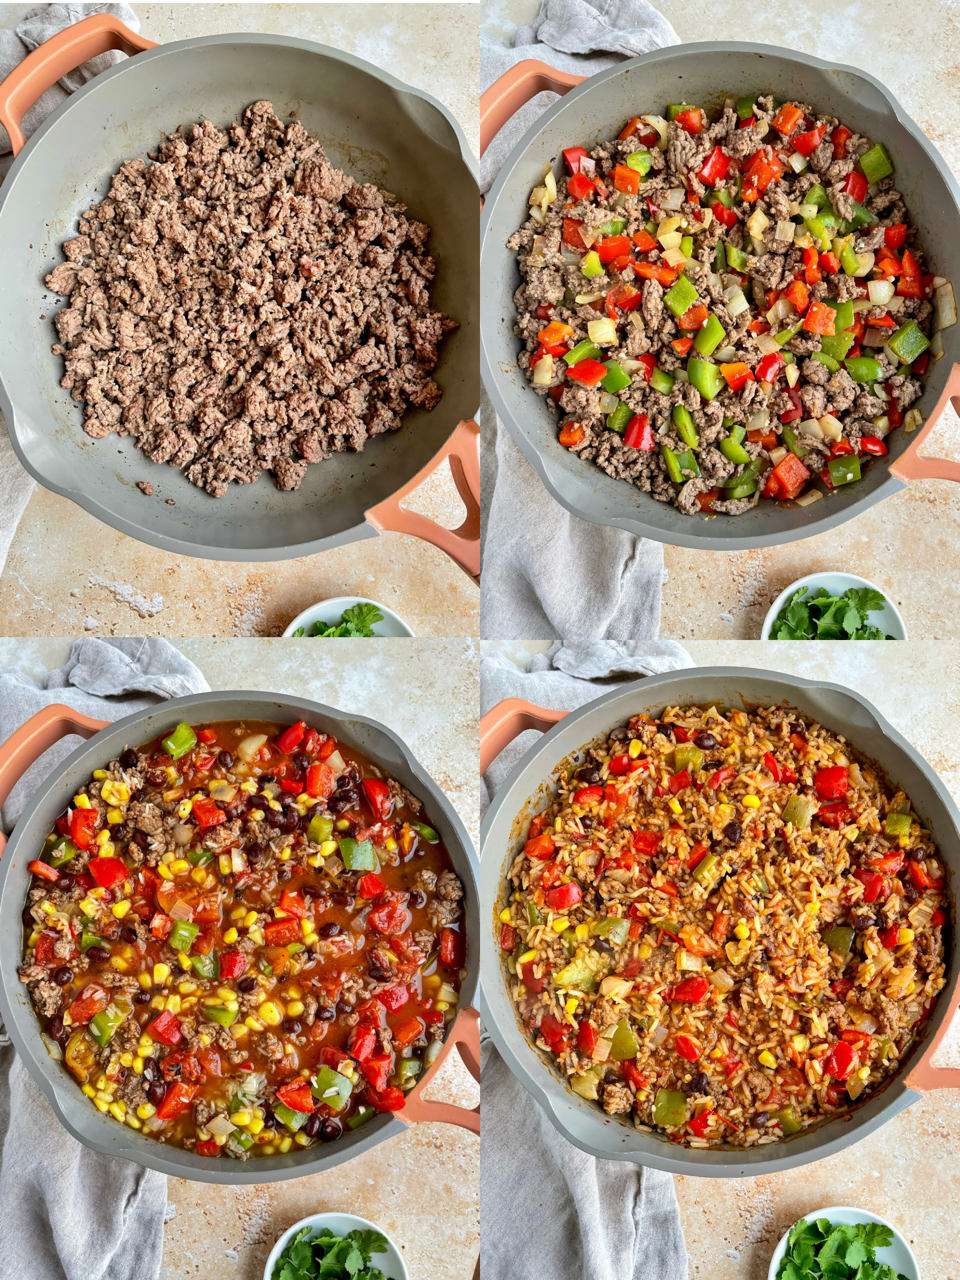 The process of browning the beef, sauteing the peppers and onions, adding remaining ingredients and completed skillet before the cheese is added.